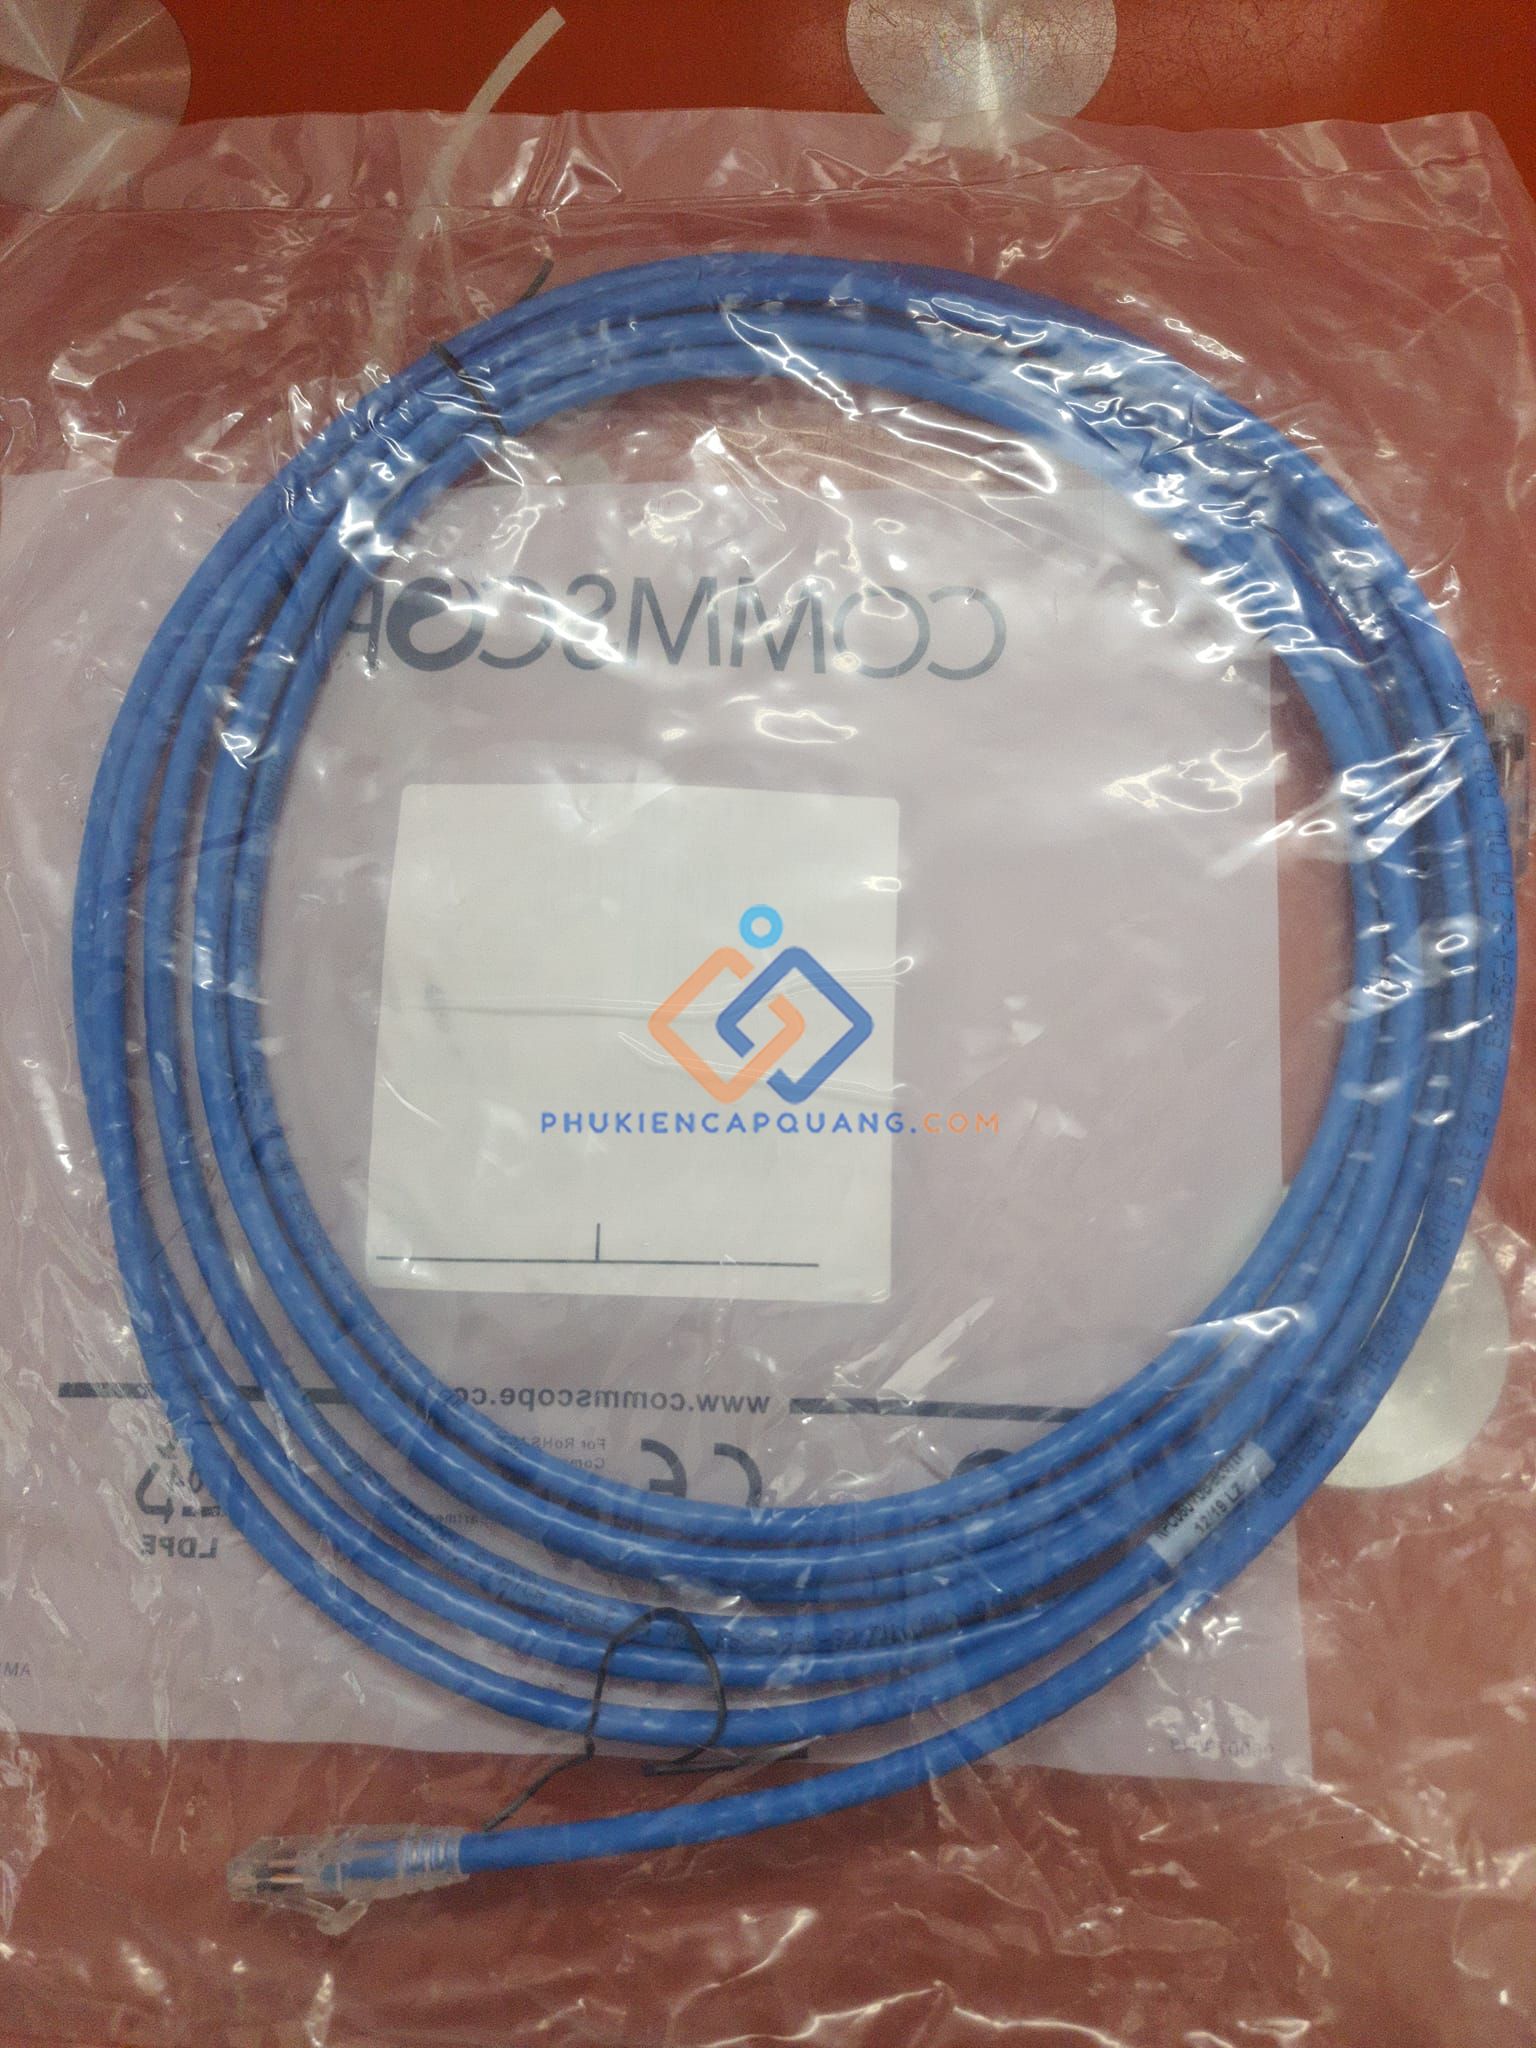 day-nhay-mang-commscope-cat6-25m